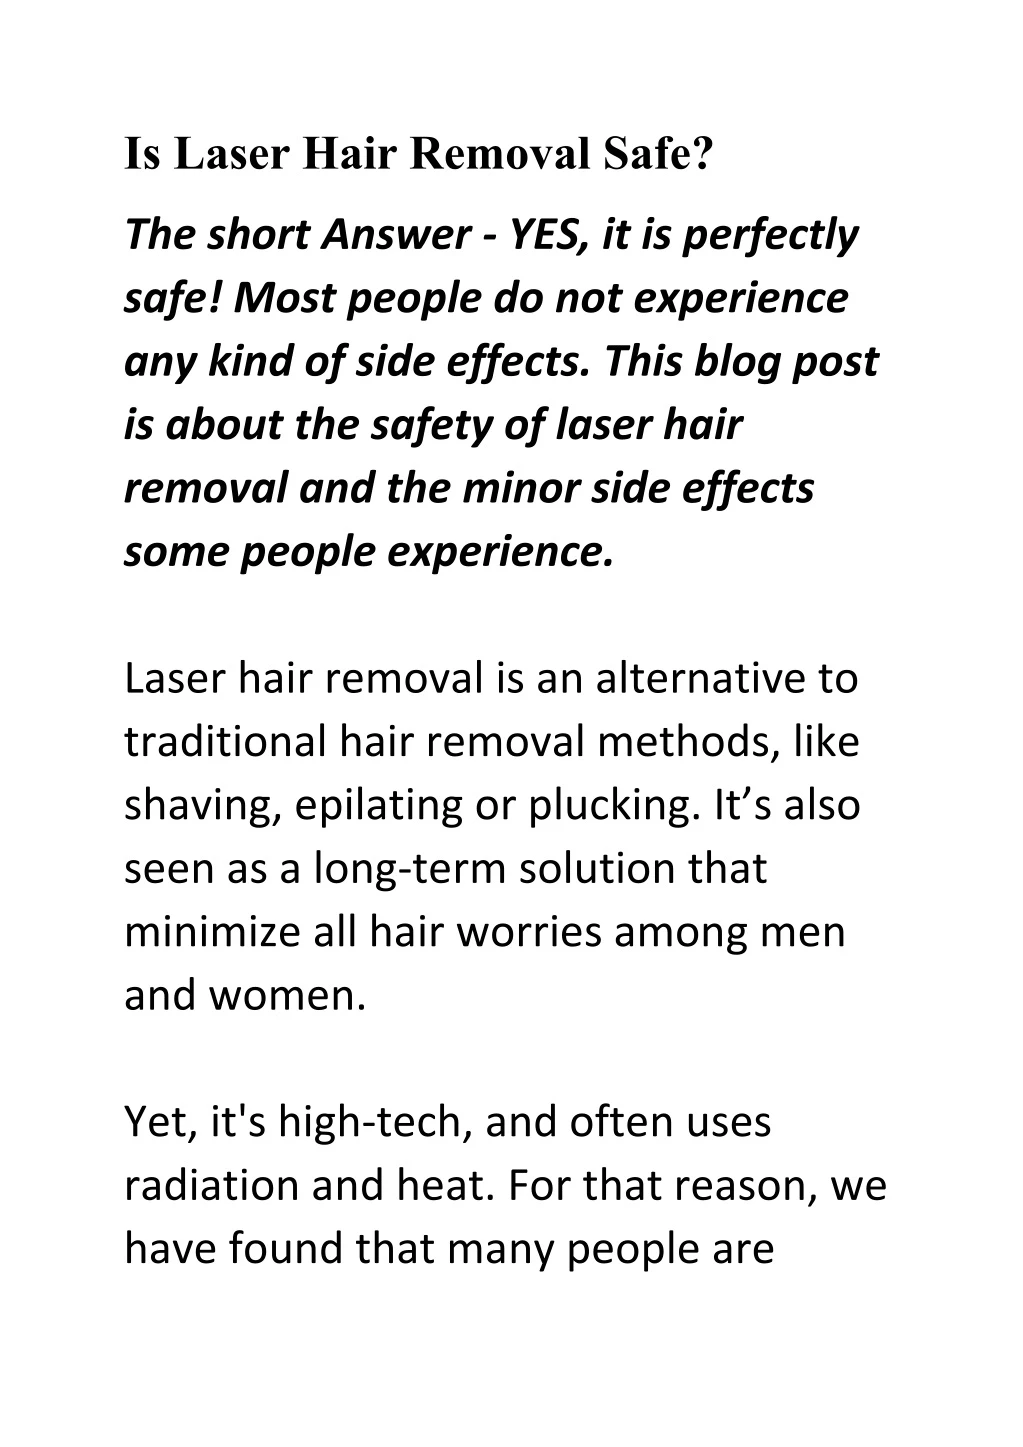 is laser hair removal safe